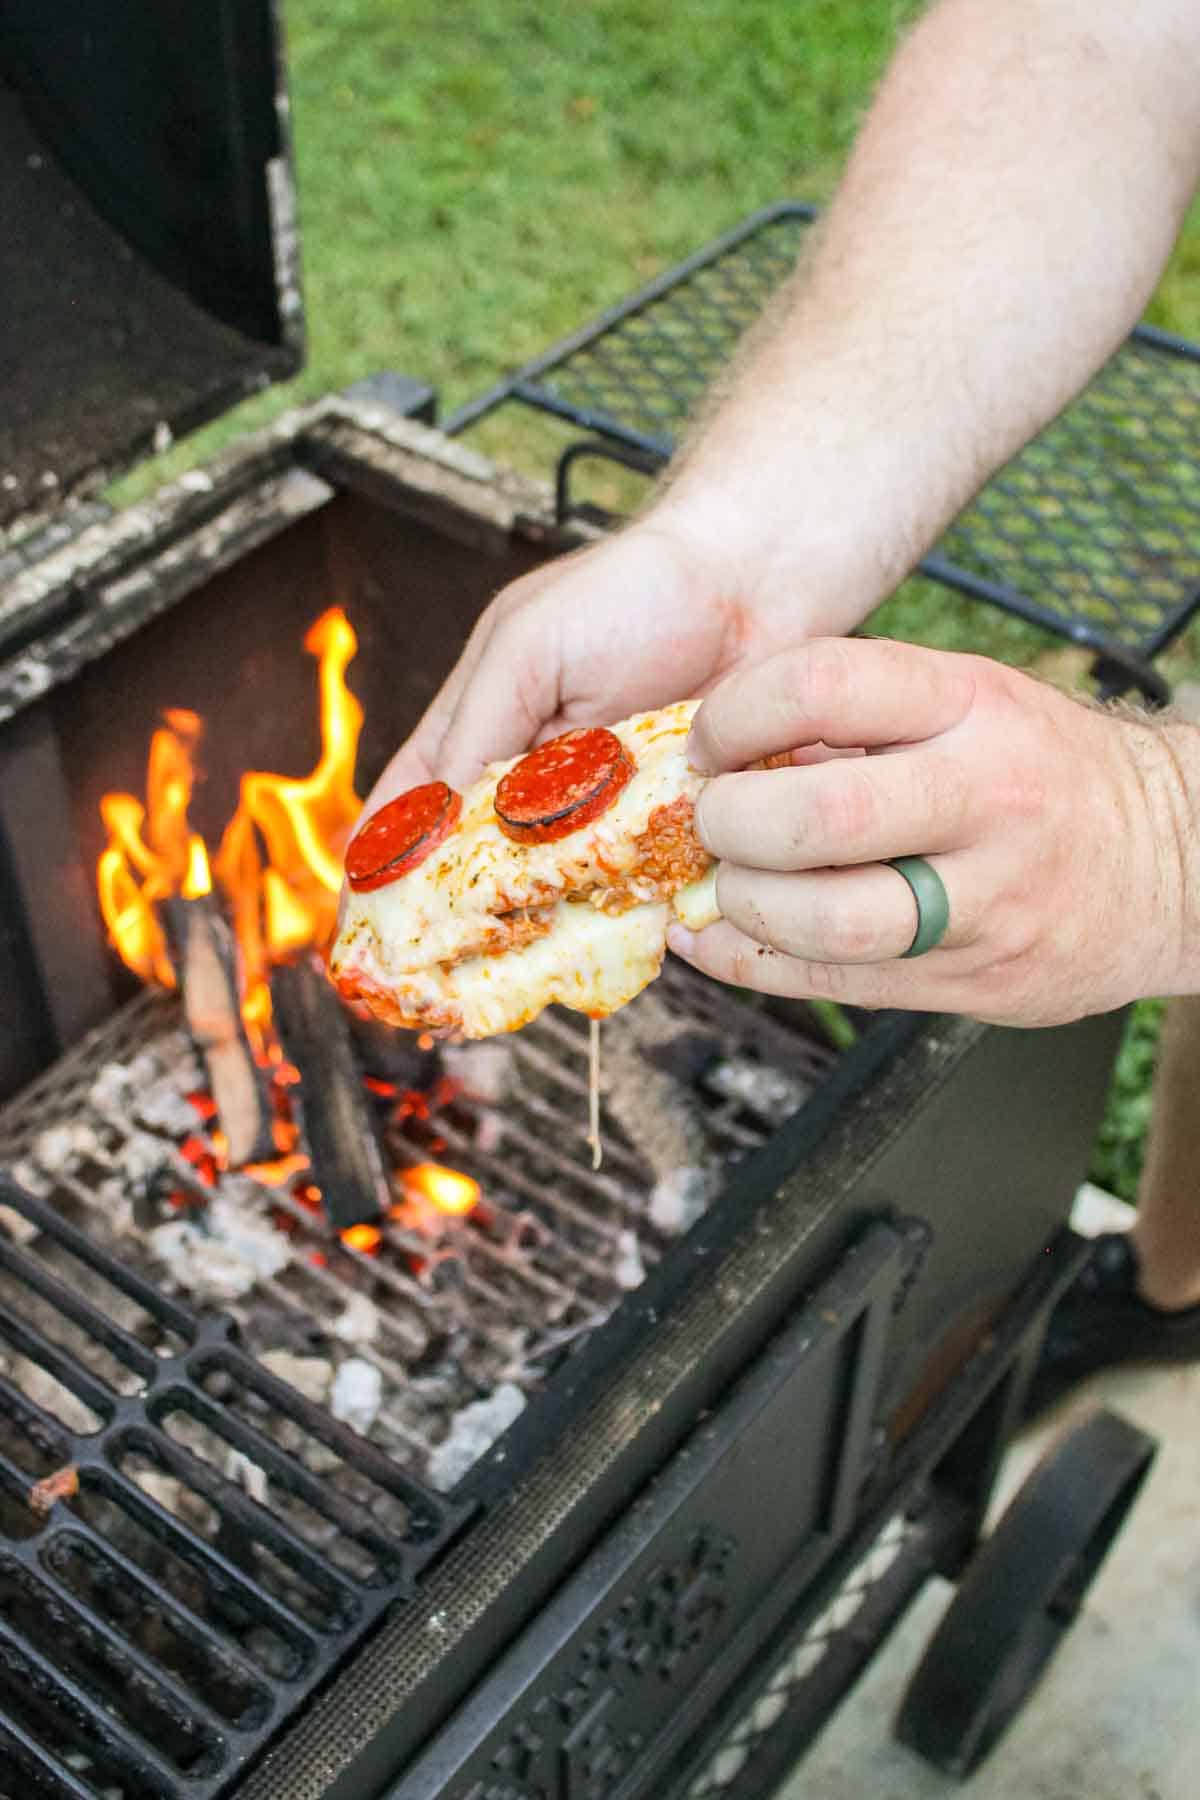 a partially eaten piece of pizza bread held over a grill